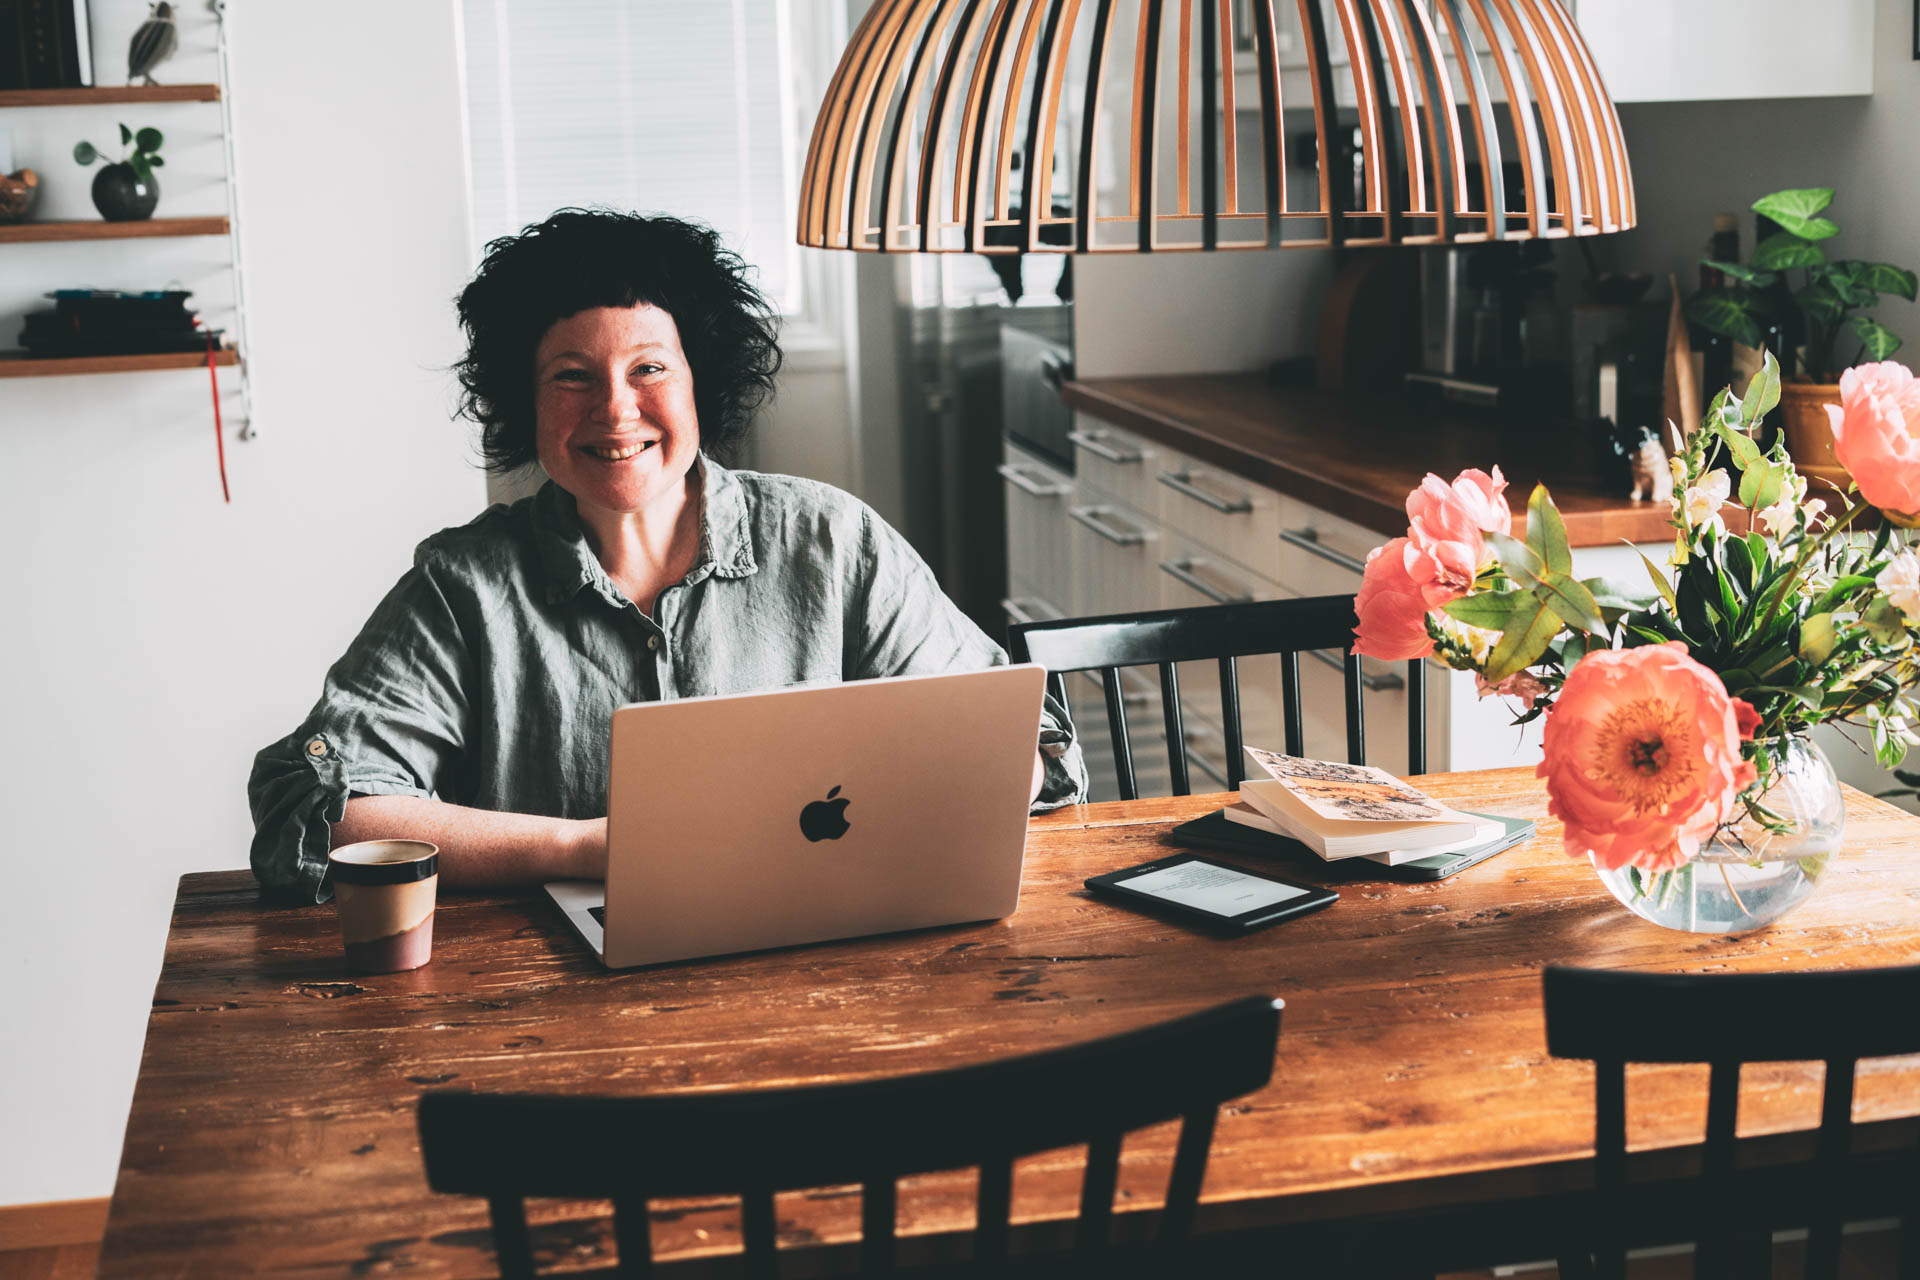 A smiling woman sitting at a kitchen table, working on a laptop.